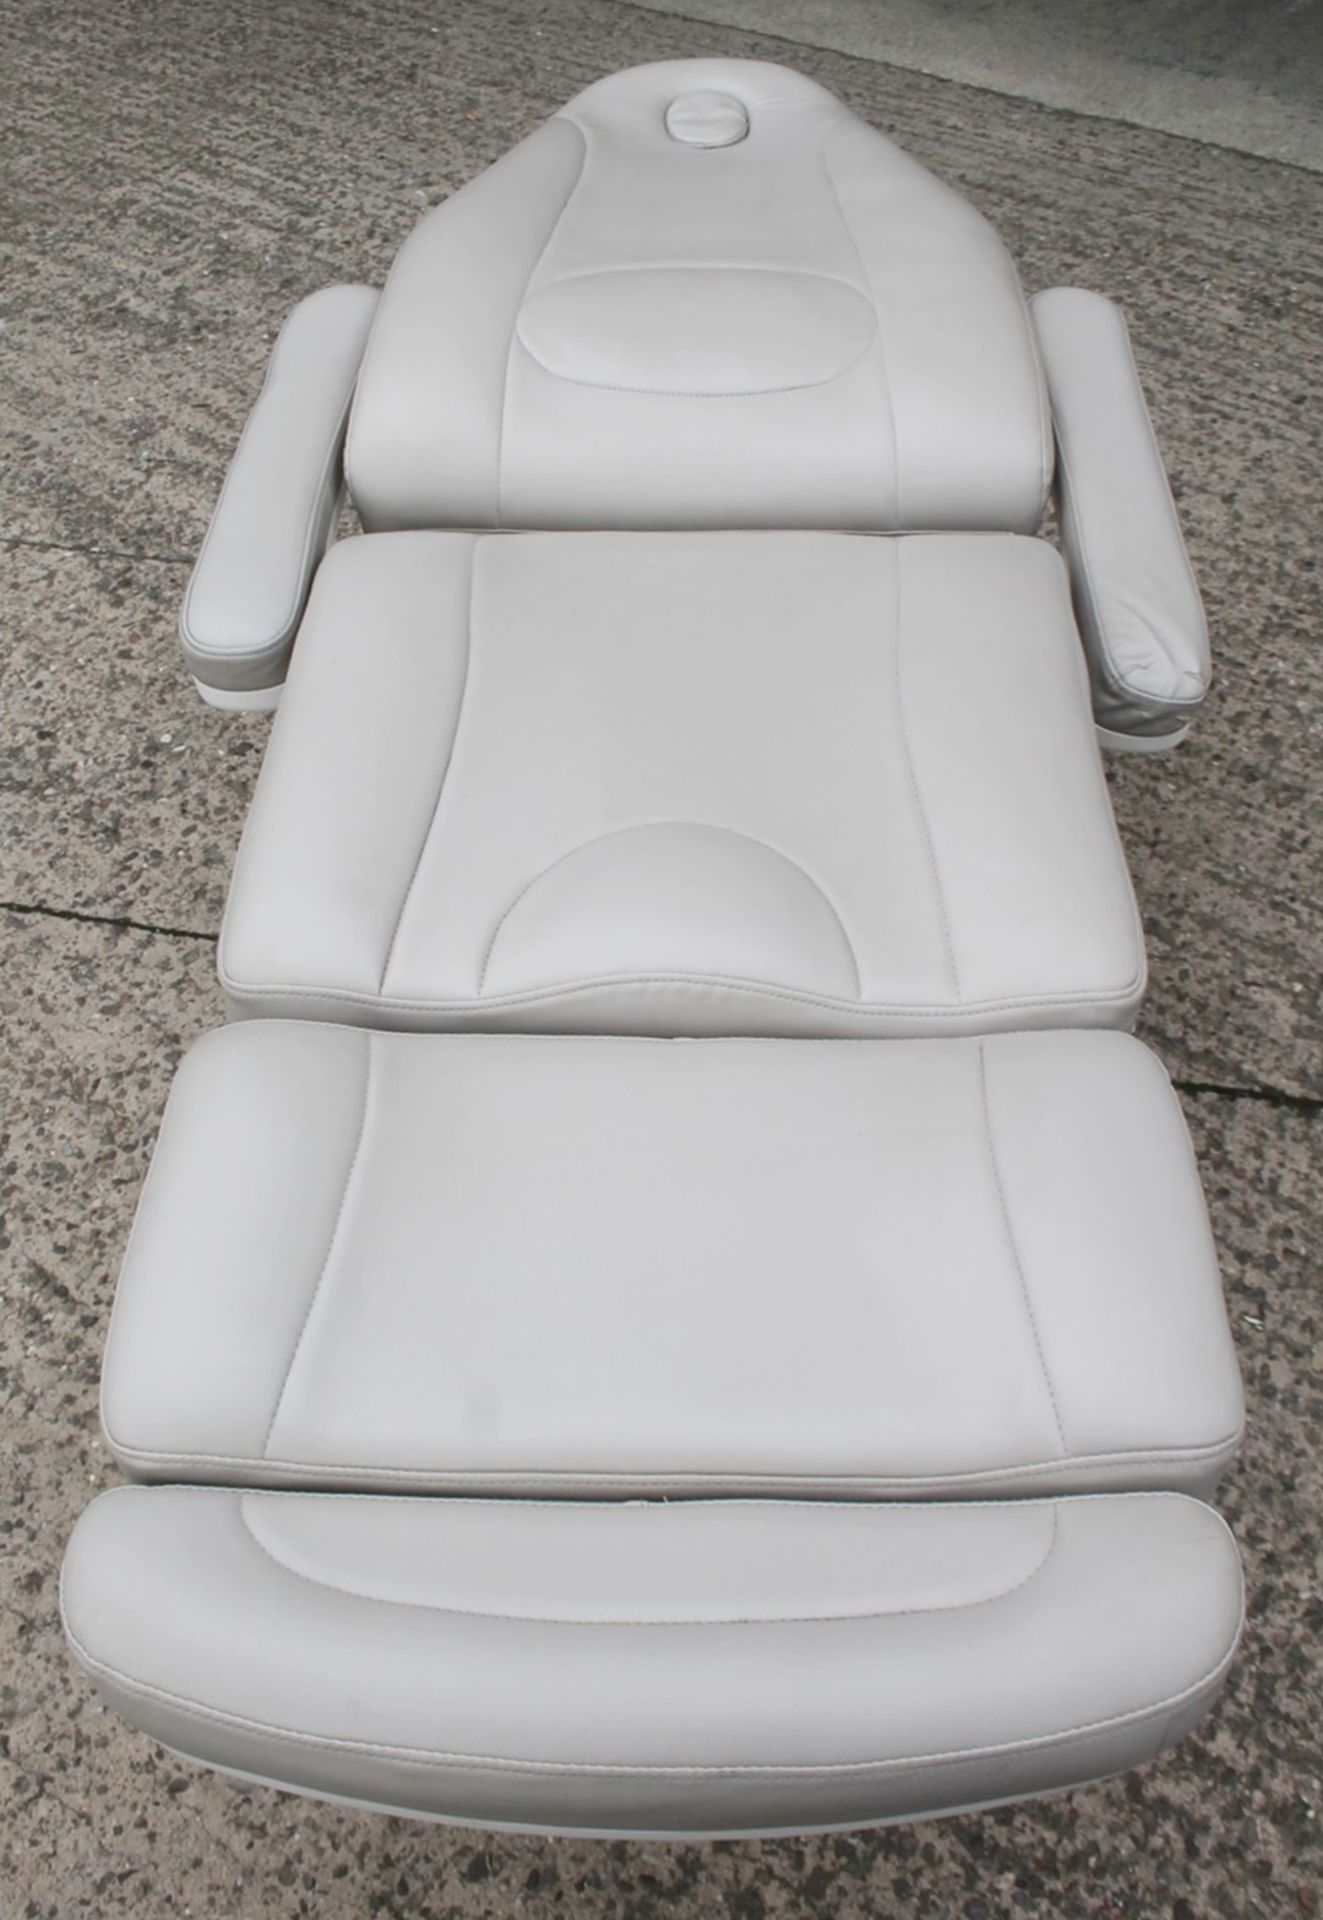 1 x Professional Electric-Hydraulic Adjustable Massage Table Spa Bed - £5 Start No Reserve - Image 3 of 12